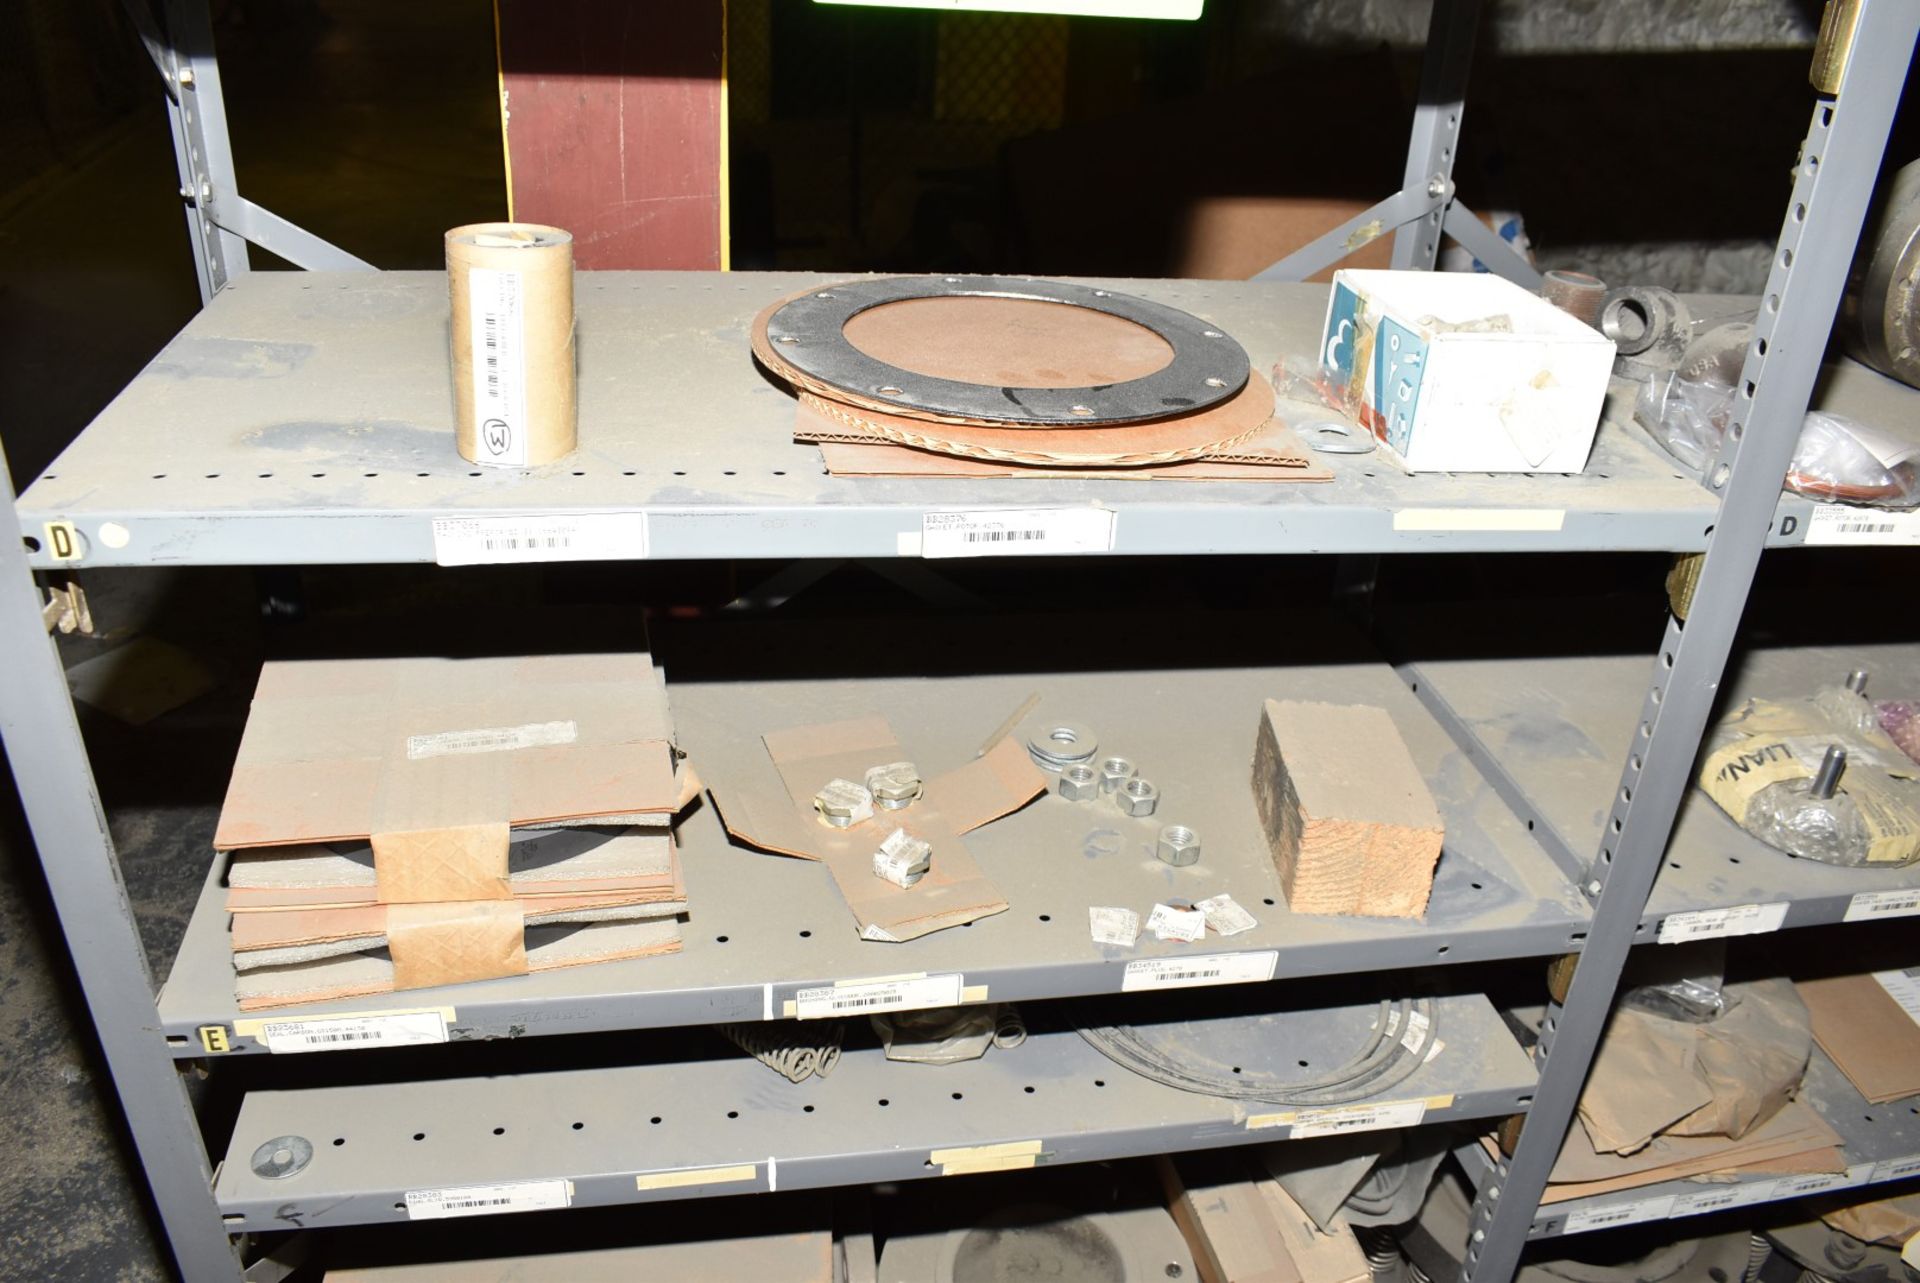 LOT/ CONTENTS OF SHELF - INCLUDING FLEX COUPLINGS, SLITTER BLADES, SPARE PARTS [RIGGING FEES FOR LOT - Image 4 of 5